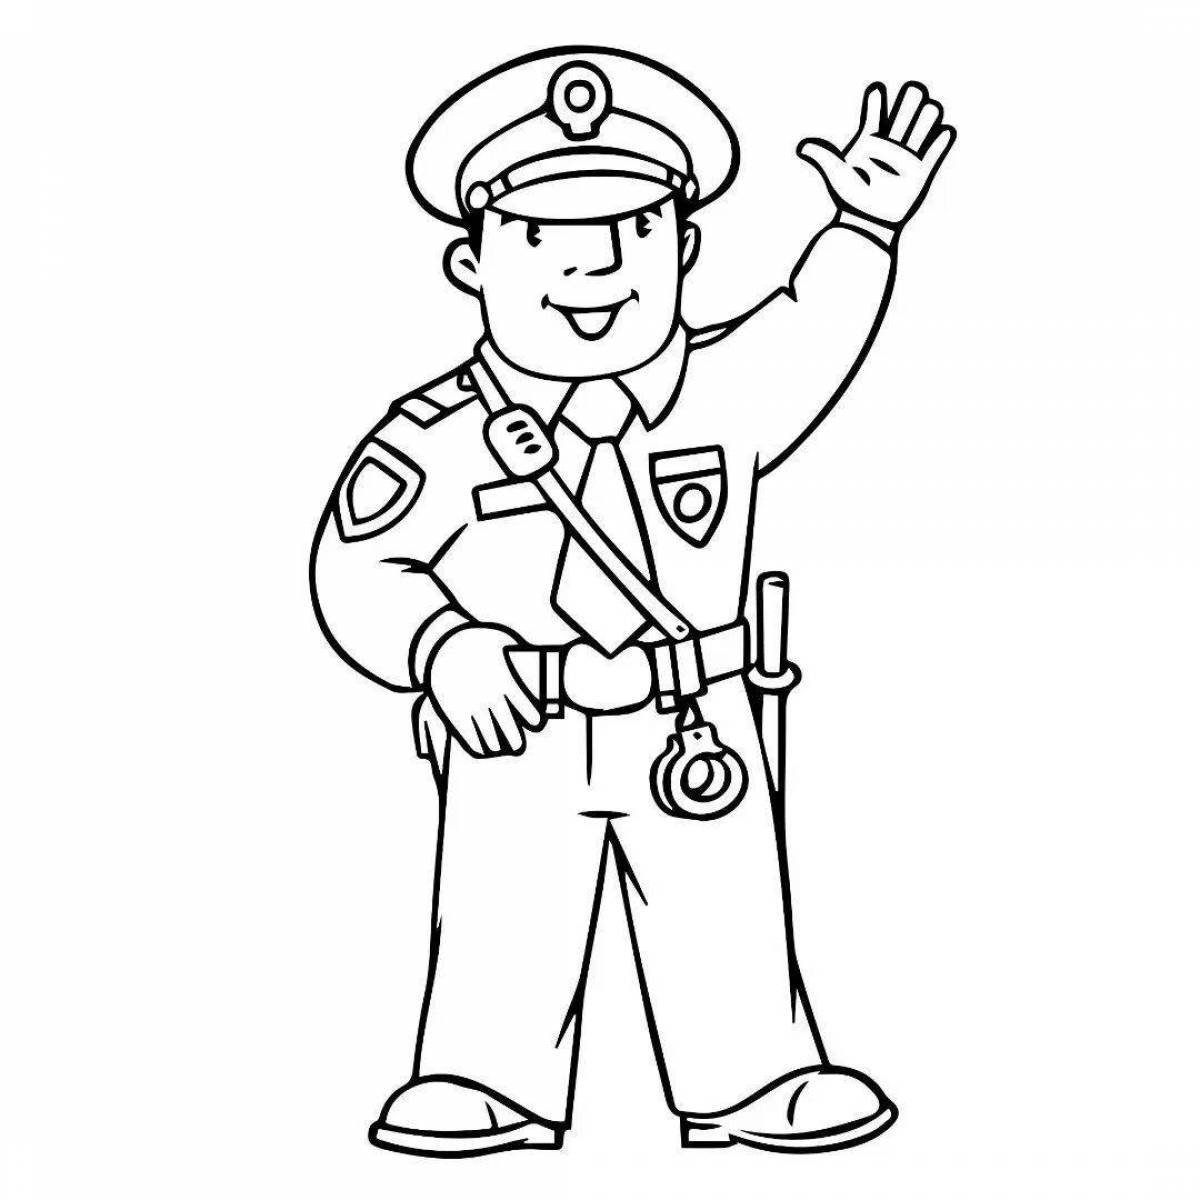 Coloring page charming traffic police inspector